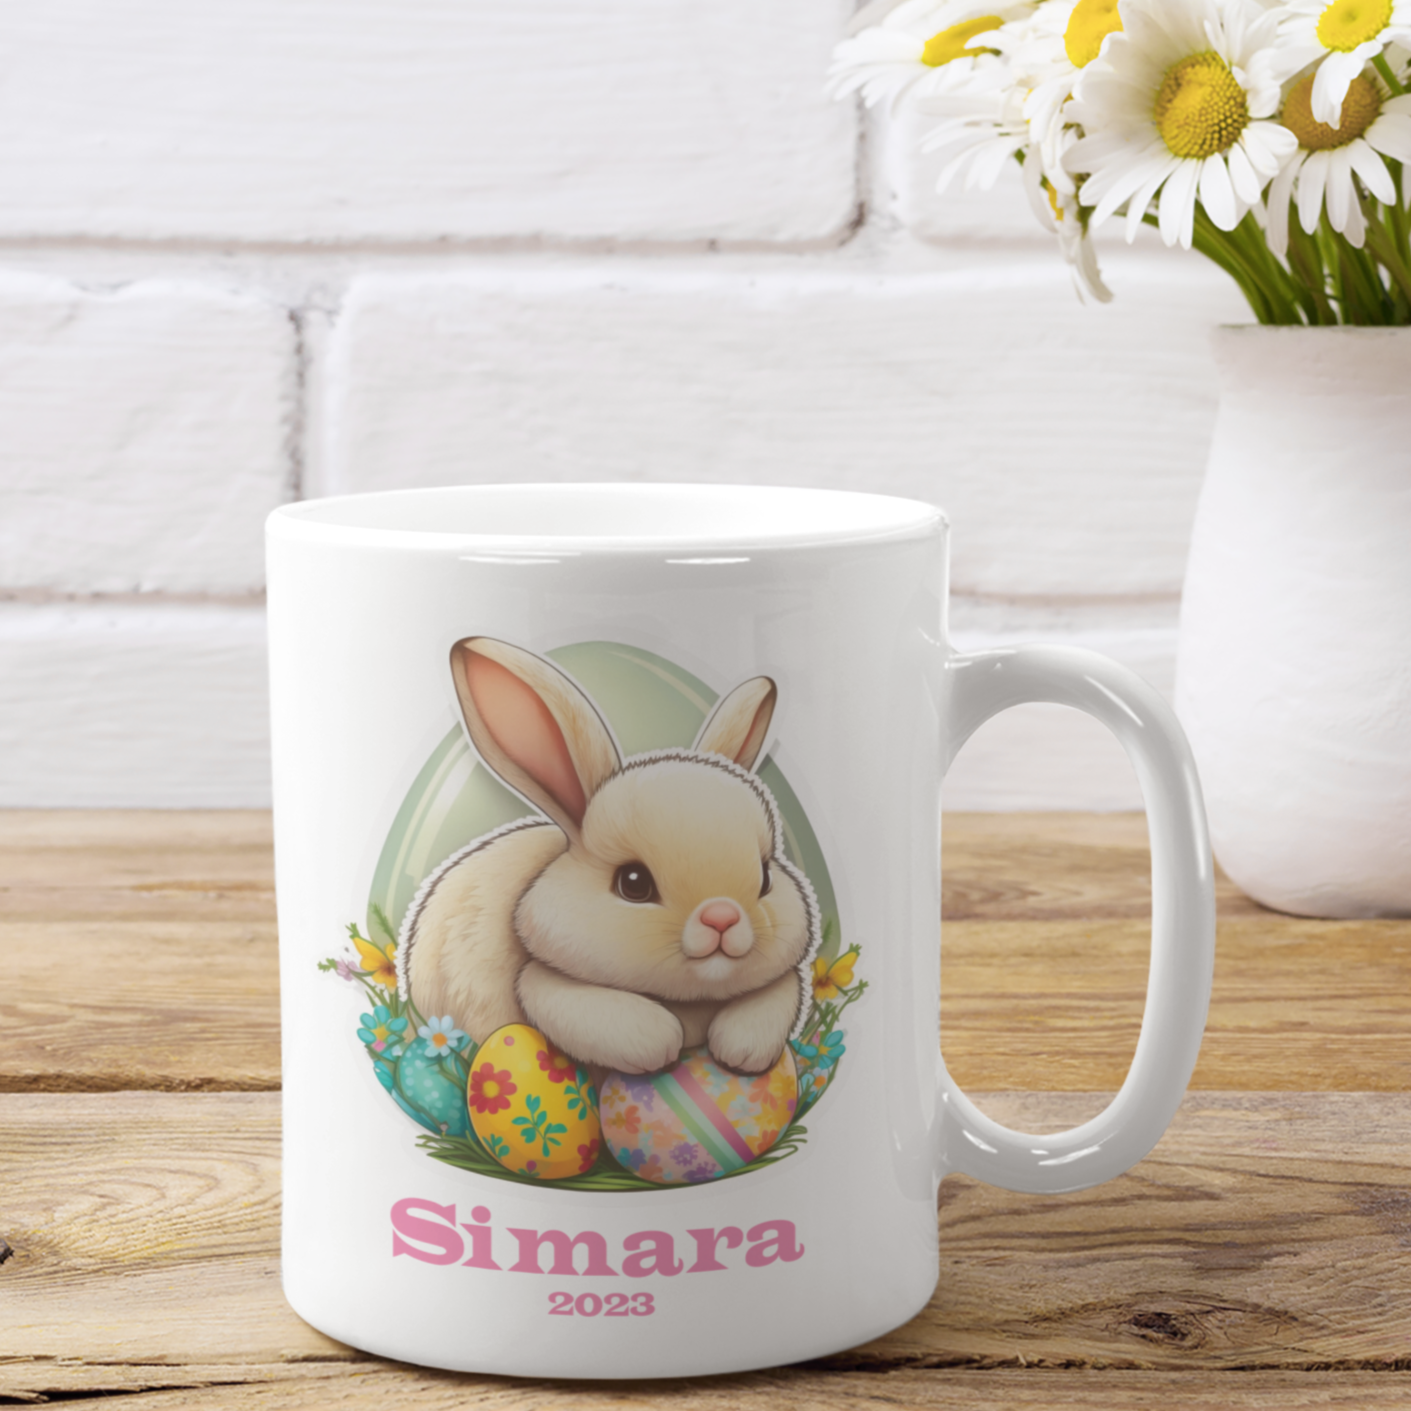 Bunny Mug with Floral Eggs and Name plus year